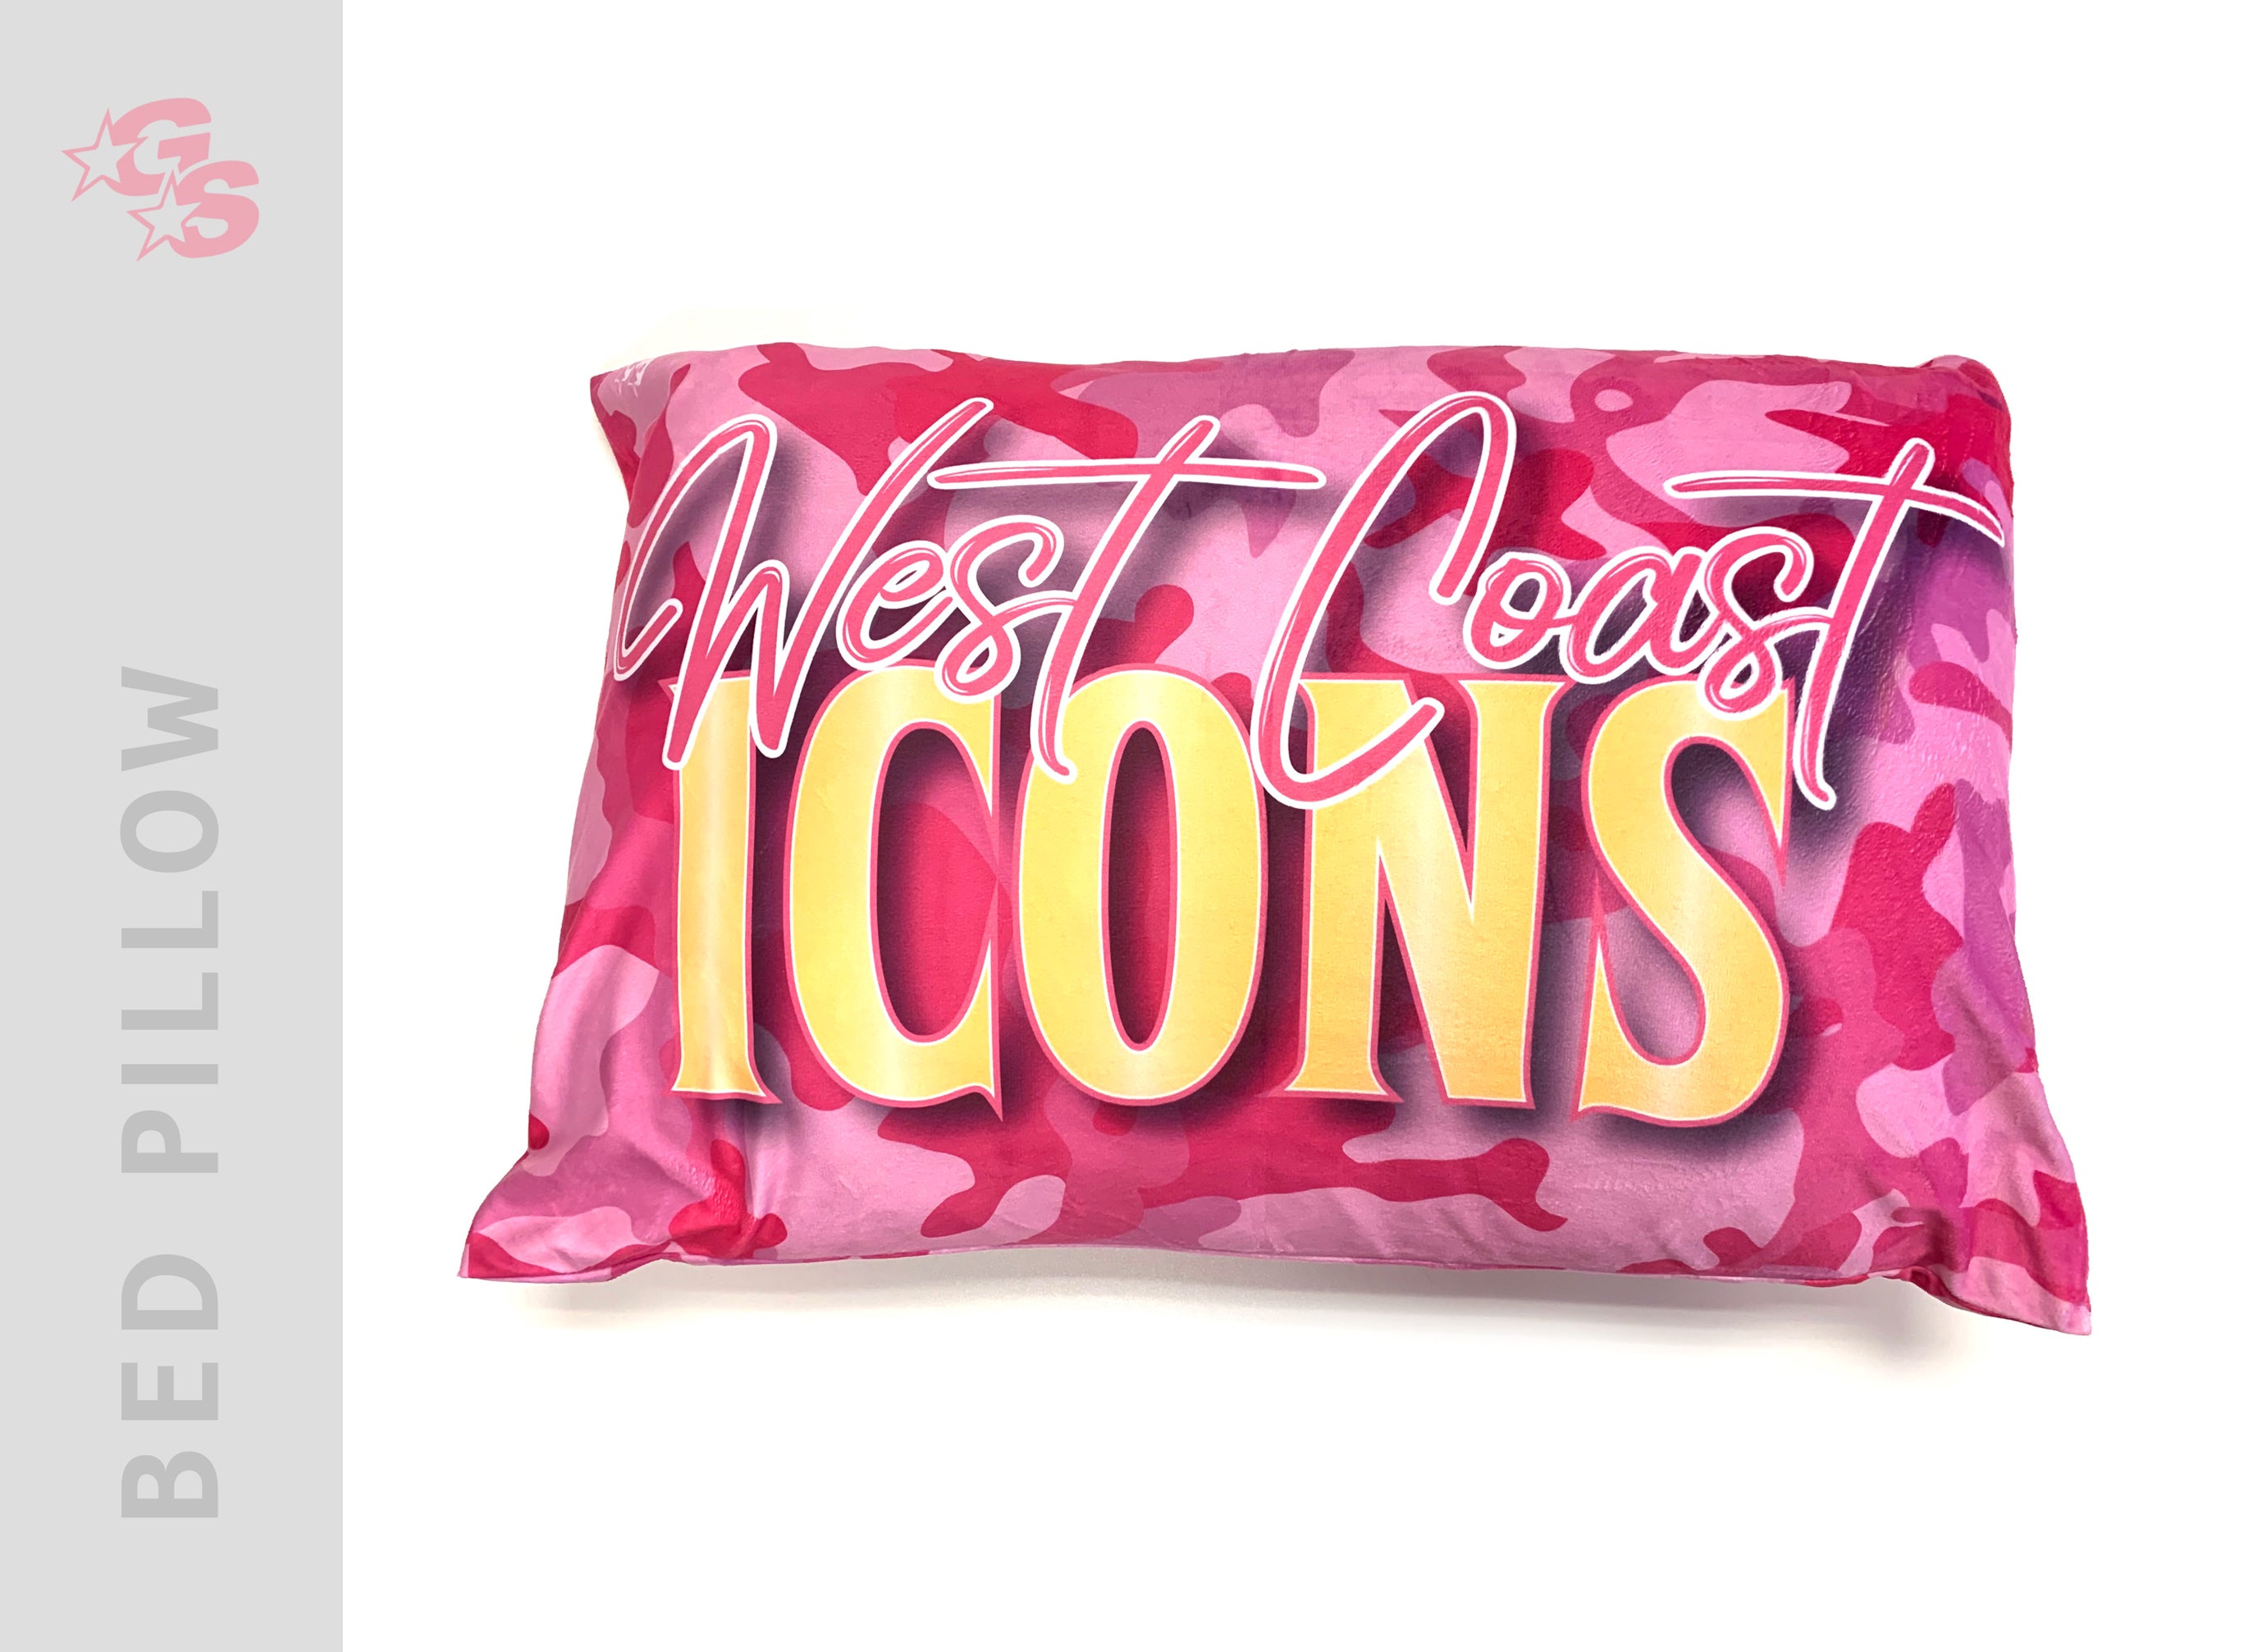 West Coast Icons Bed Pillowcase